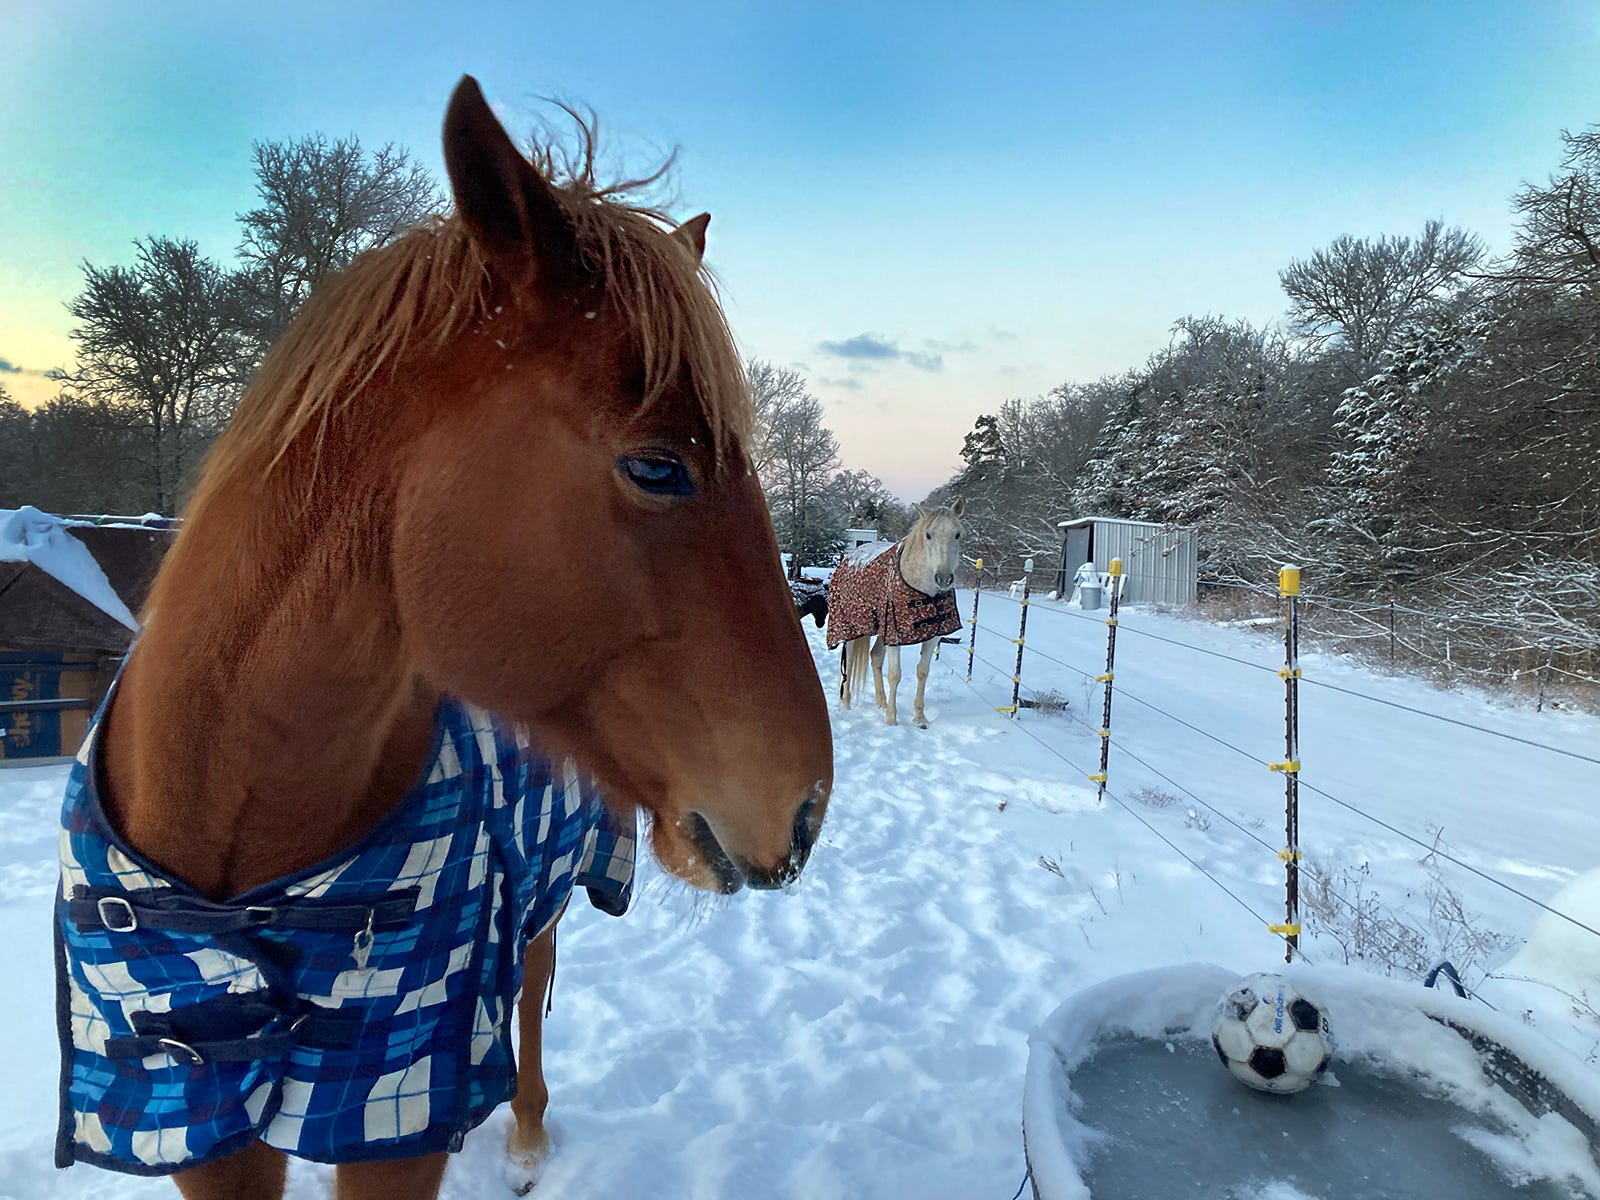 Horses wait for the ice to be broken in their water trough in Bastrop county as the sun rises Monday February 15, 2021. The area saw 4-6 inches of snow and below freezing temperatures.